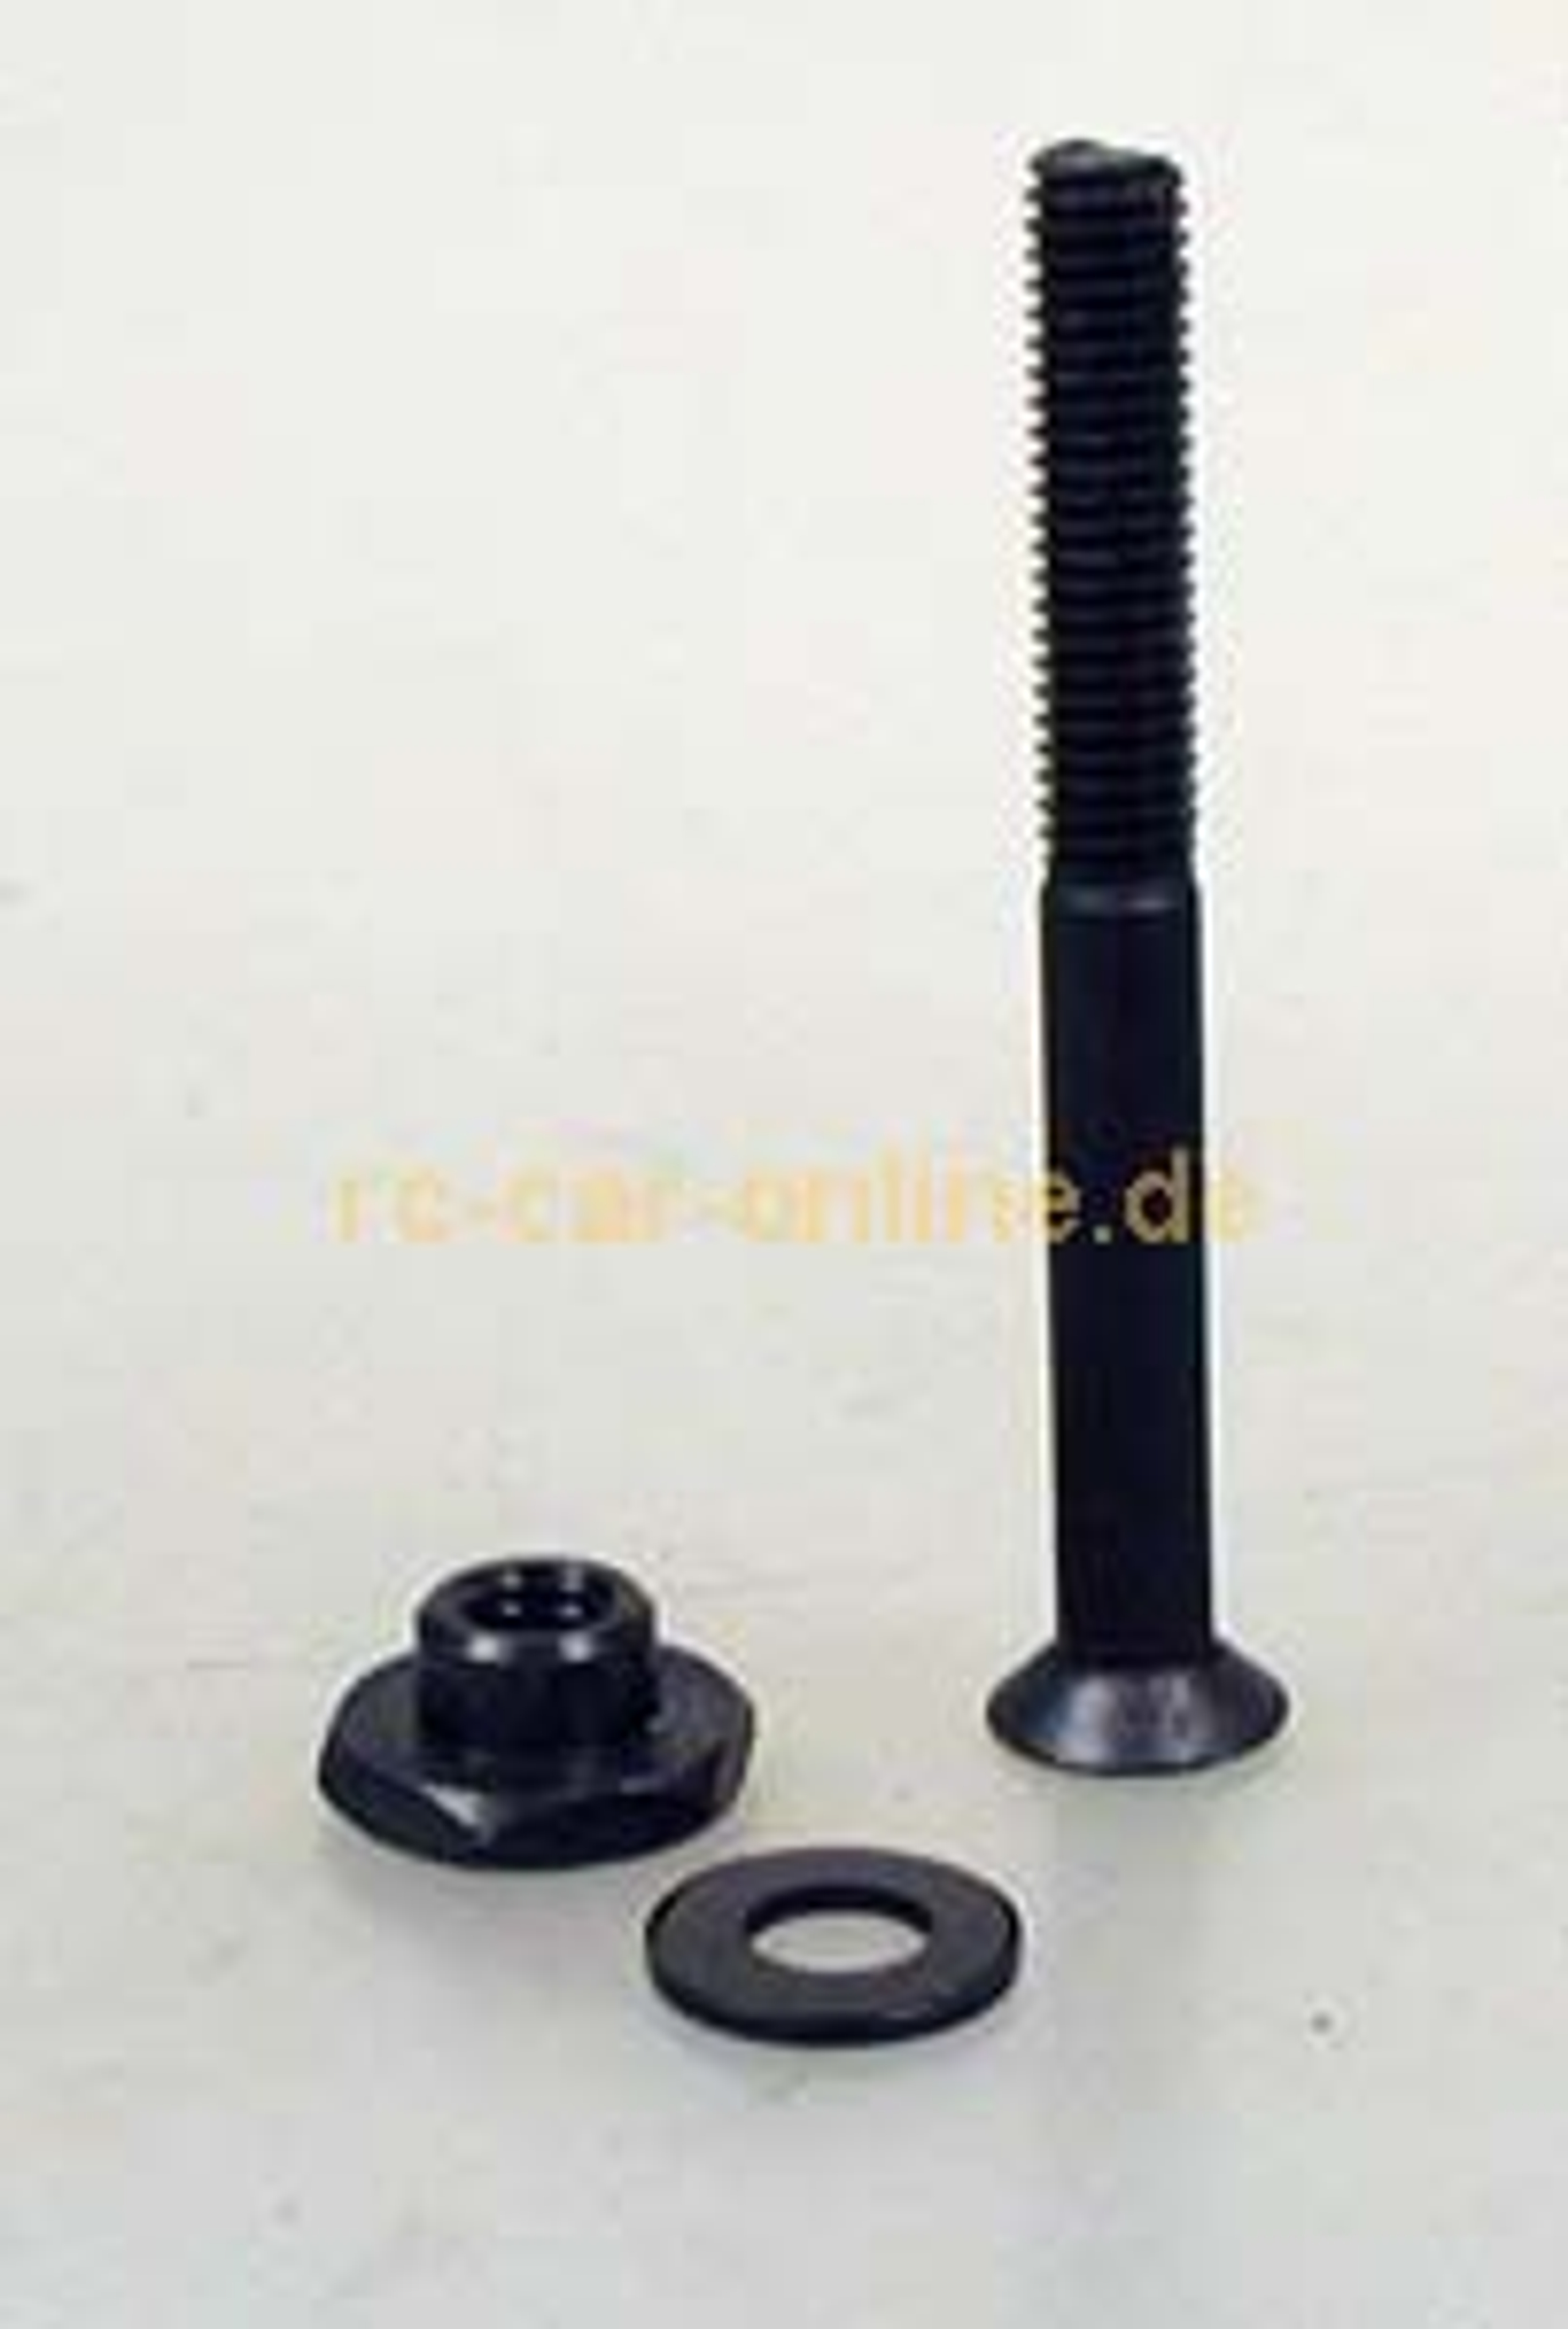 8412/09 M6 Nut with plain washer, 1 pce.